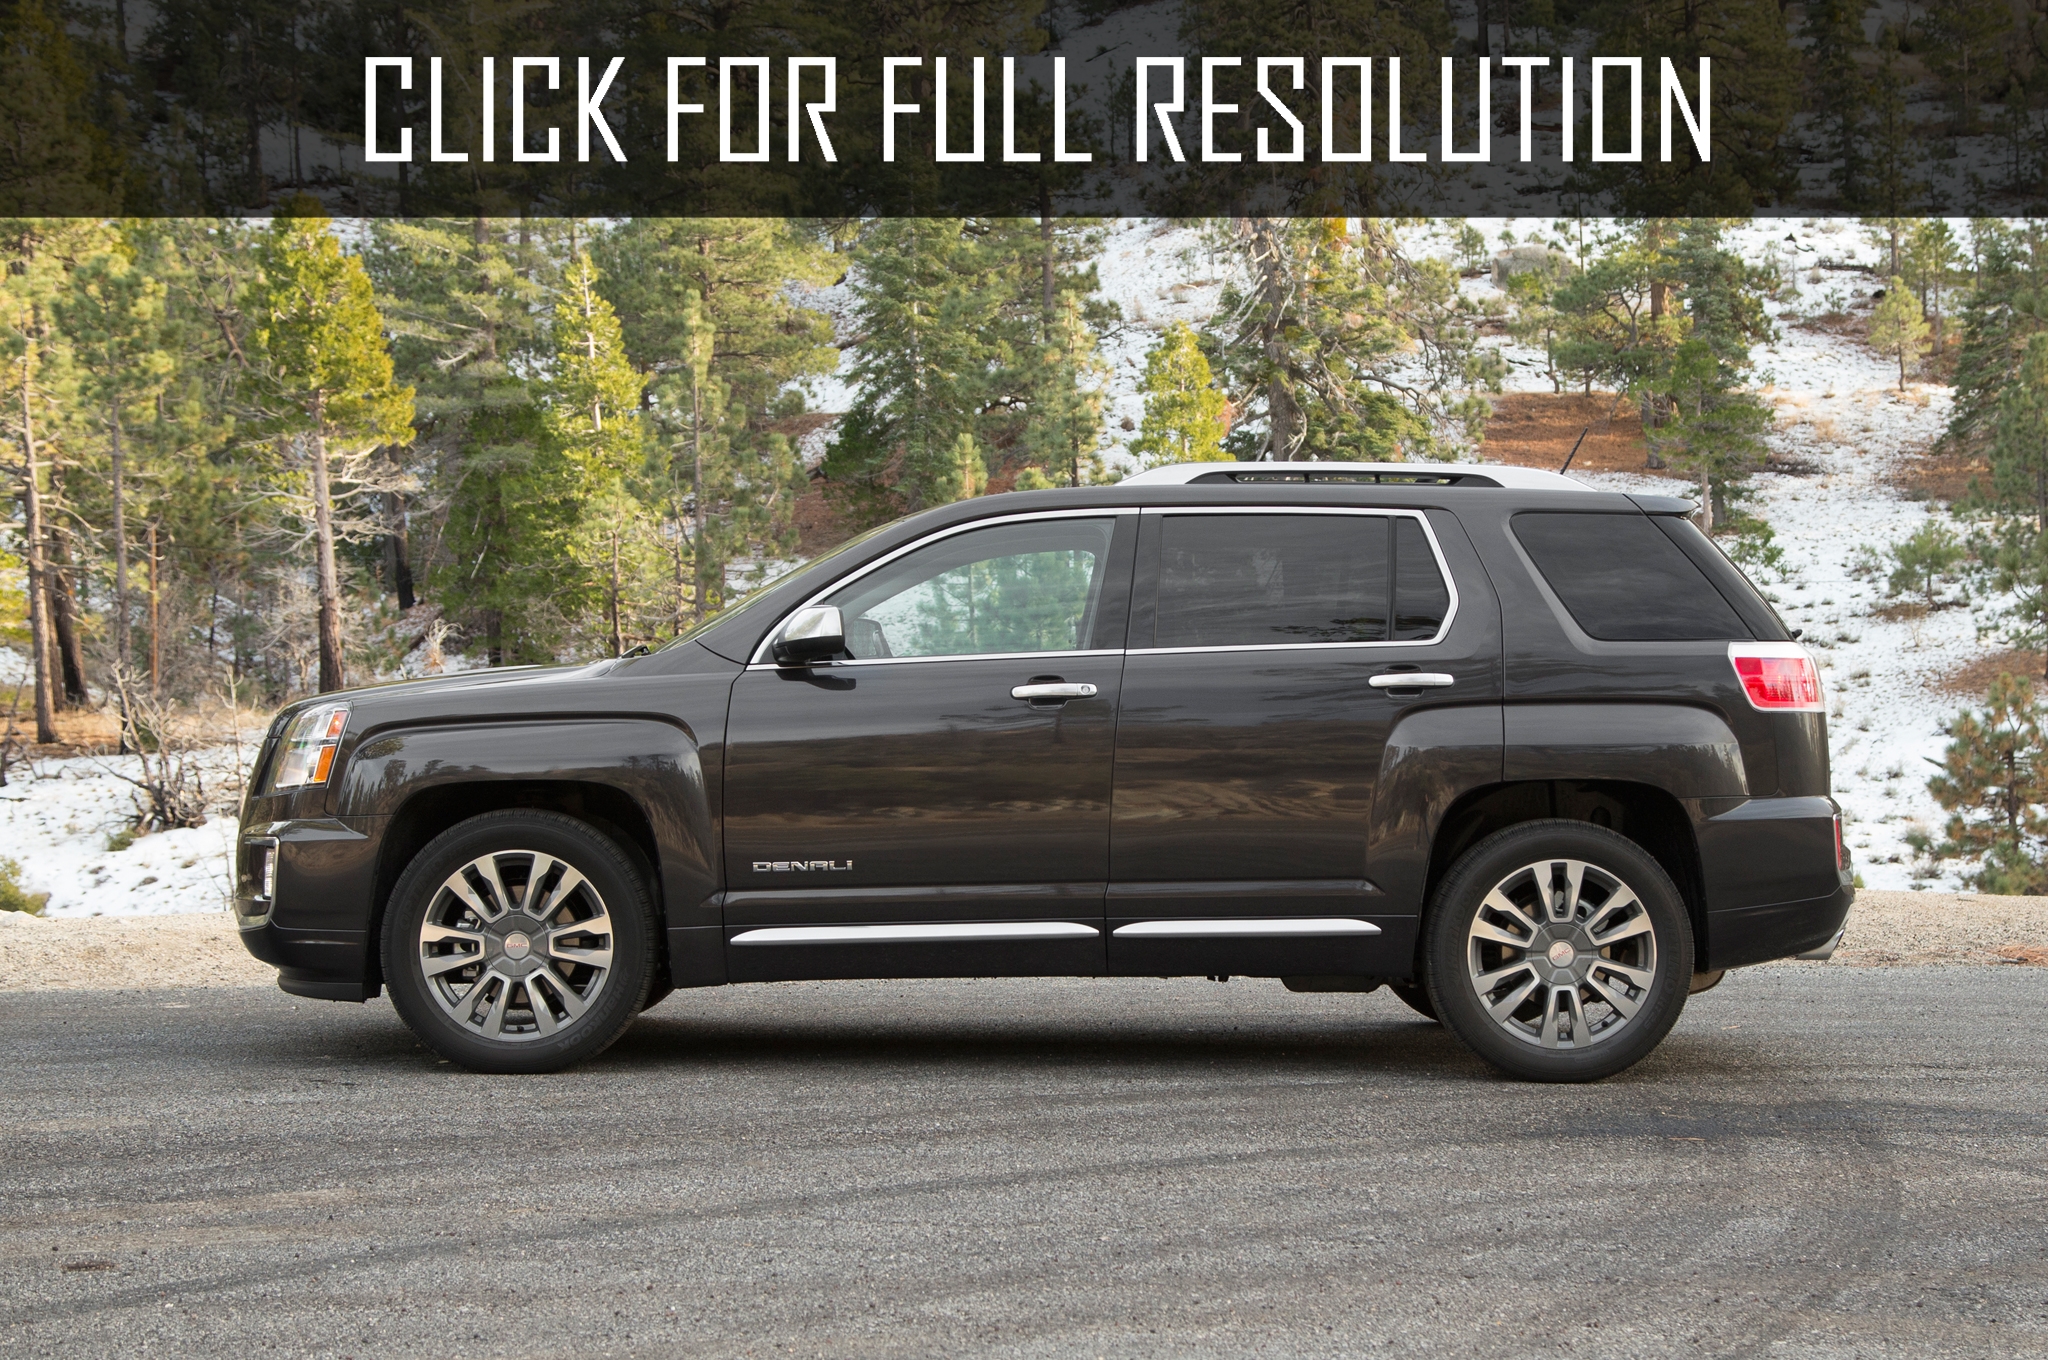 2016 Gmc Terrain Denali news, reviews, msrp, ratings with amazing images